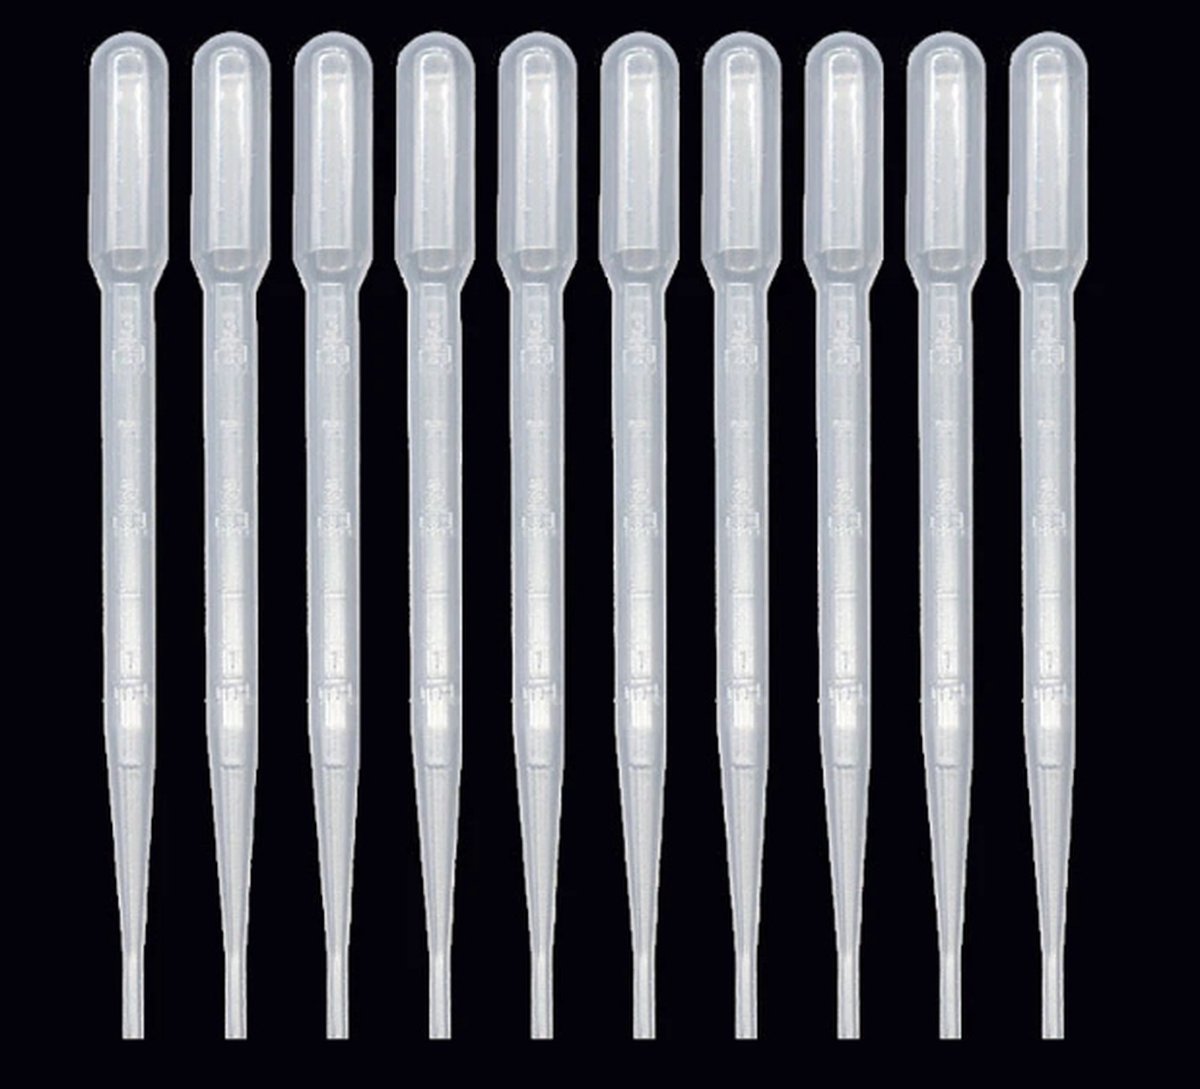 10x | Pipet | 3 ml | Whisky Pipet - Merkloos